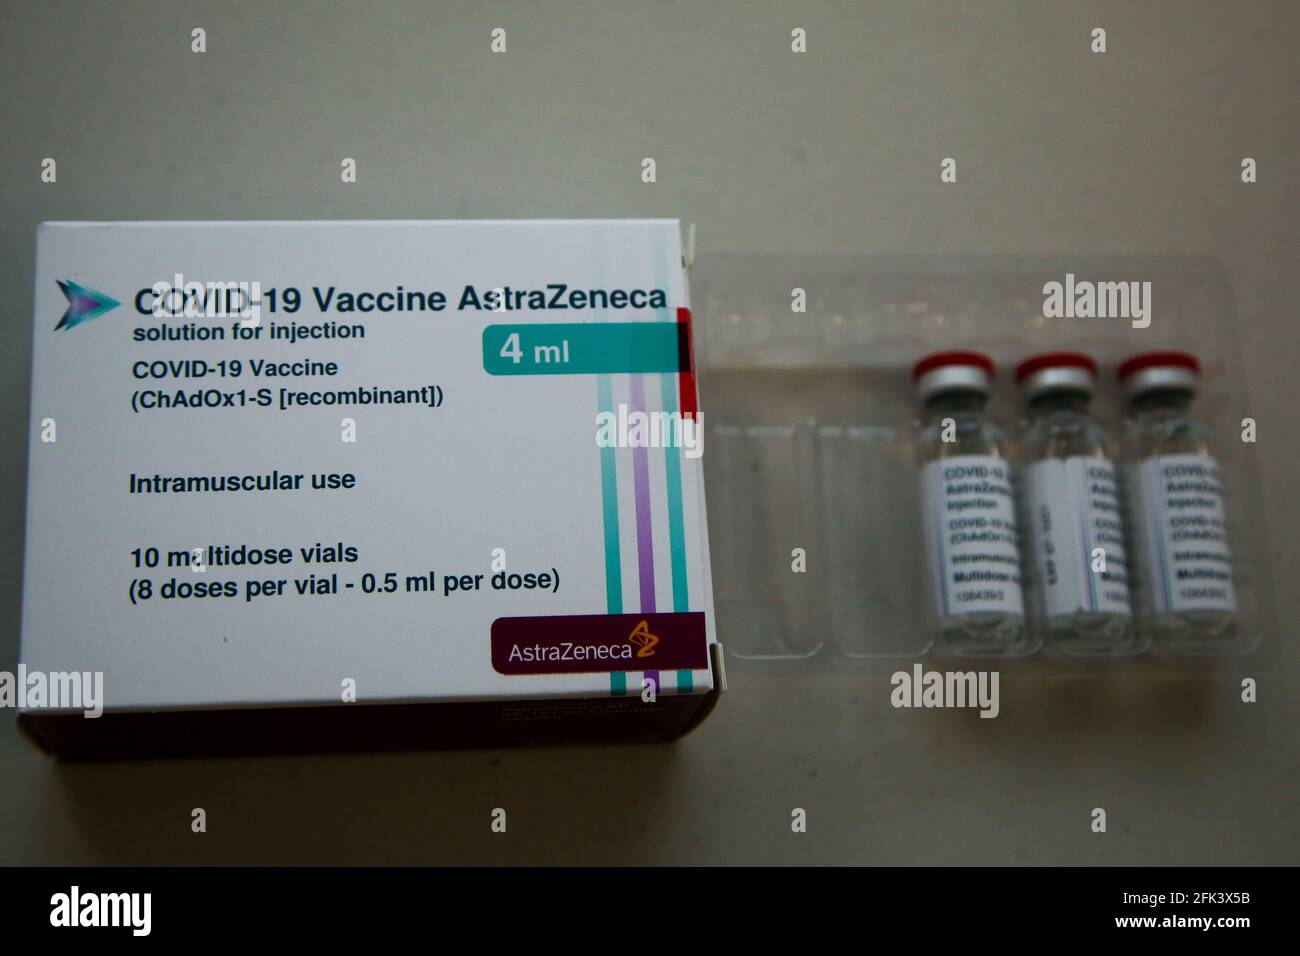 London, UK 27 April 2021 - A box and bottles containing Oxford AstraZeneca Covid-19 Vaccine at a vaccination centre in London. Credit Dinendra Haria /Alamy Live News Stock Photo